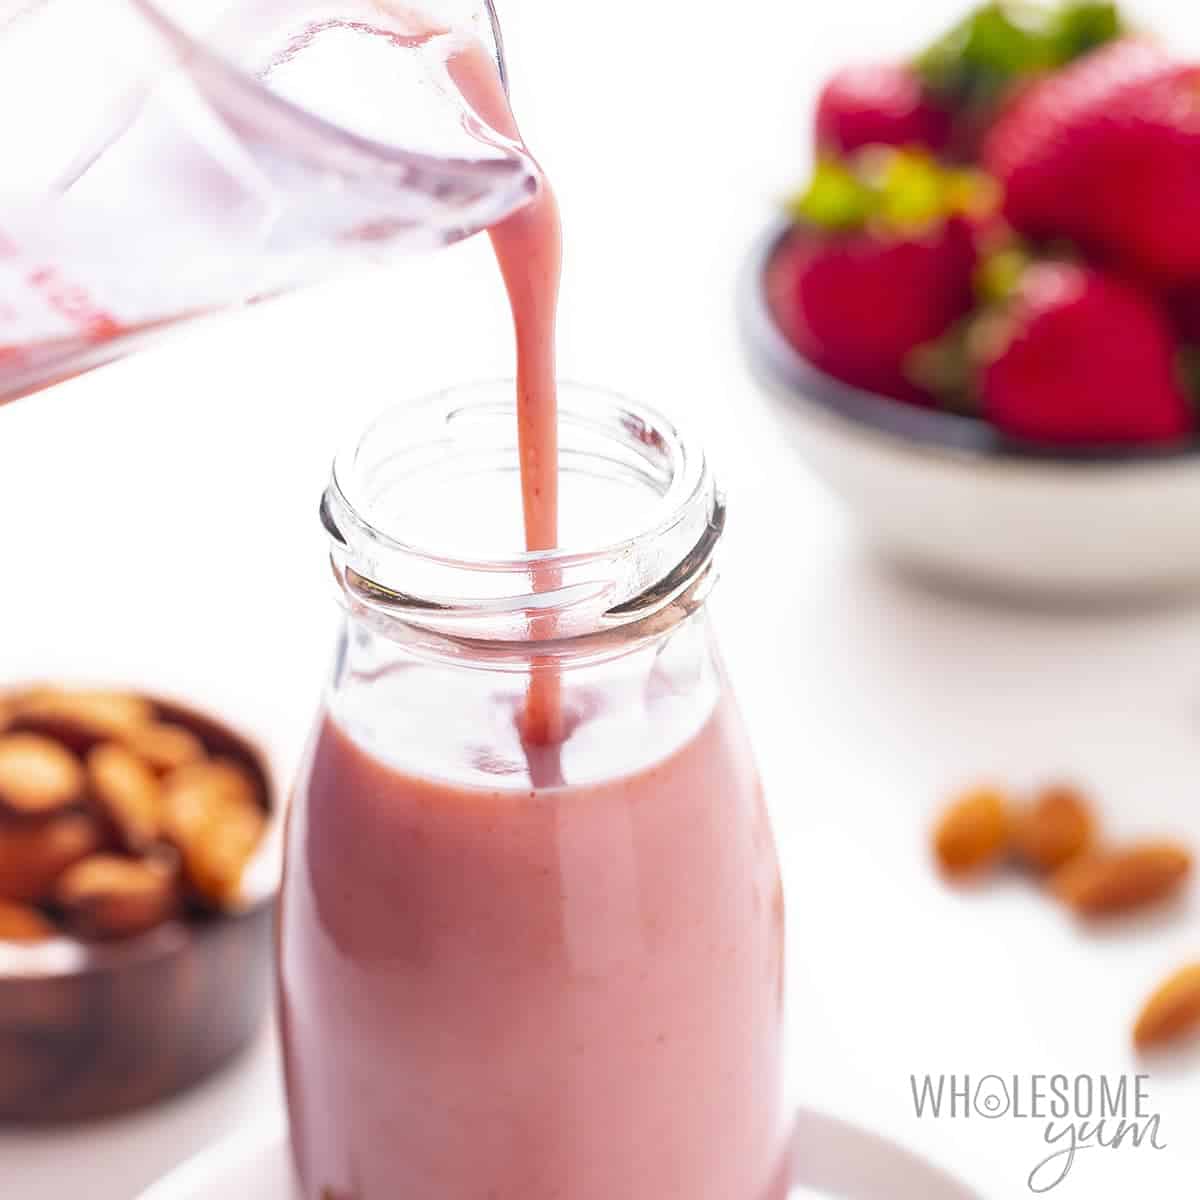 Strawberry almond milk pouring into glass bottle.